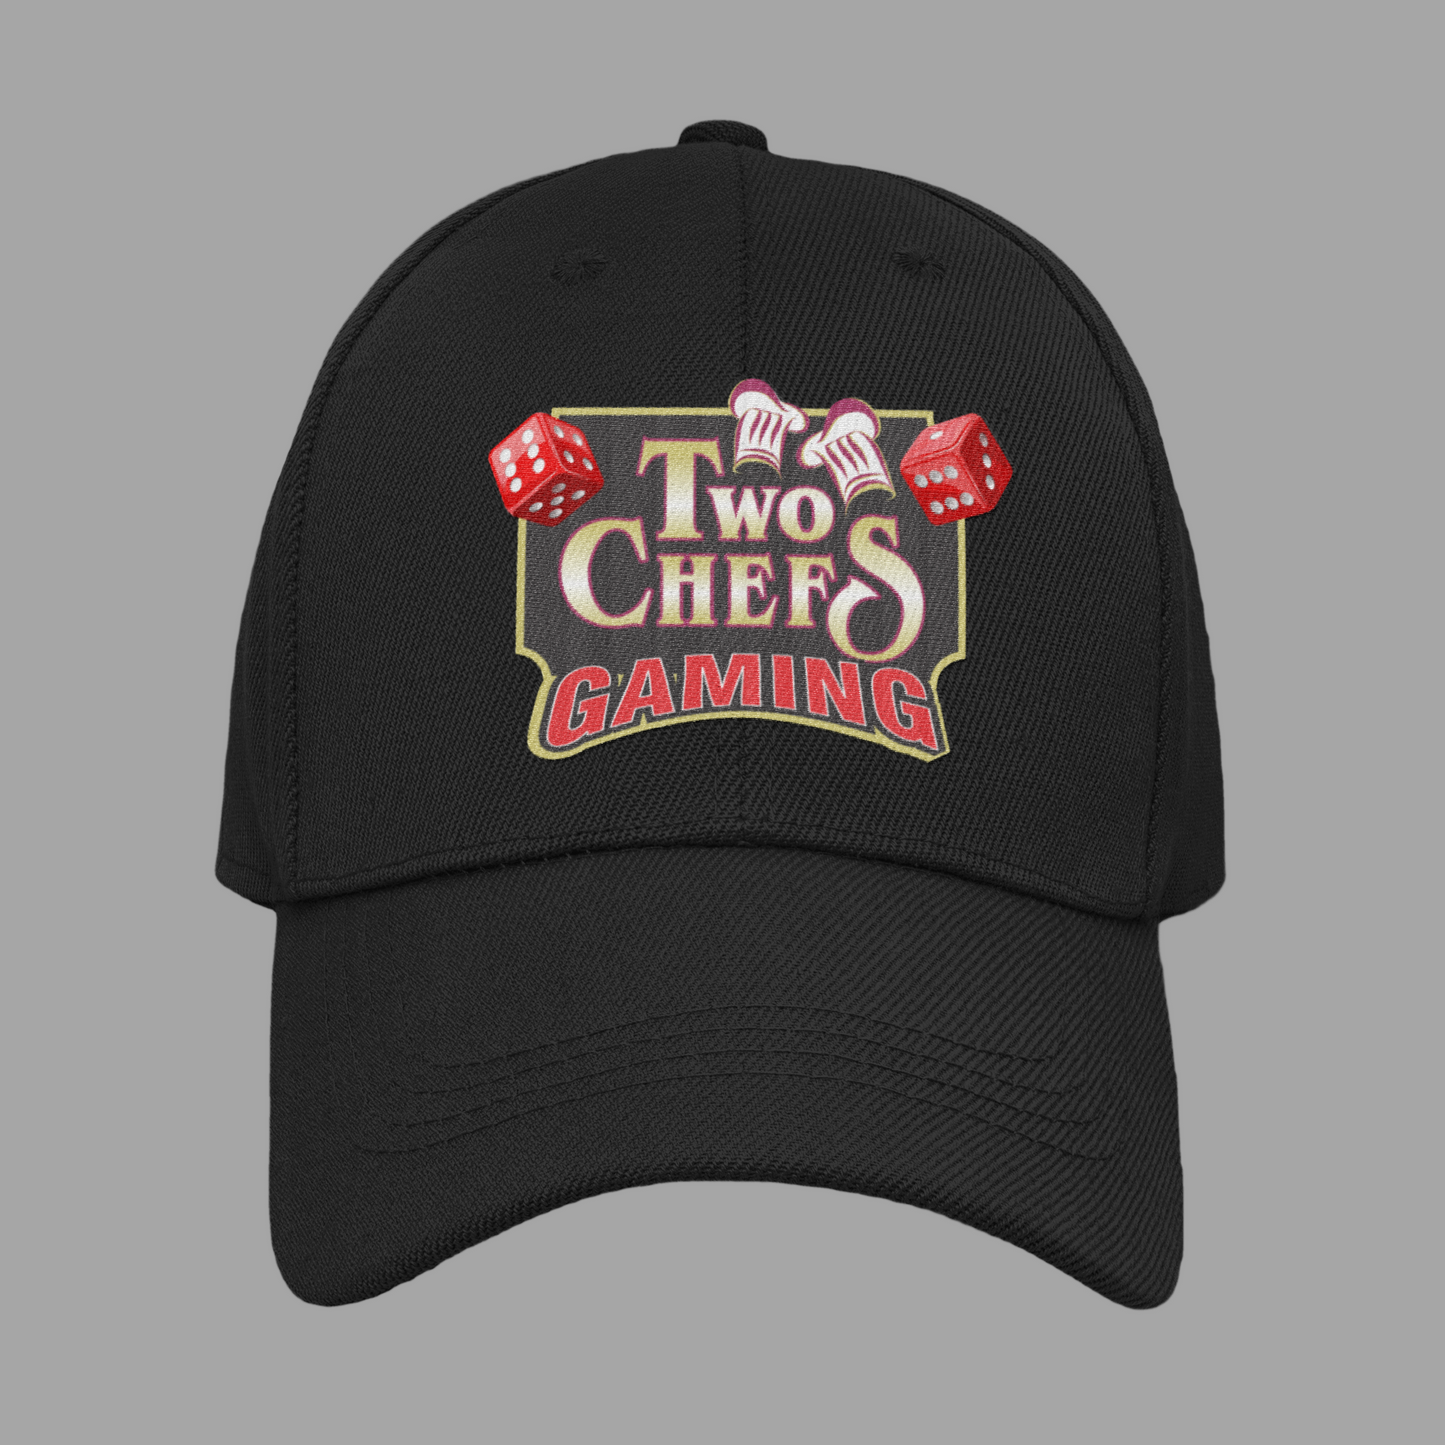 Two Chefs Gaming -Black hat